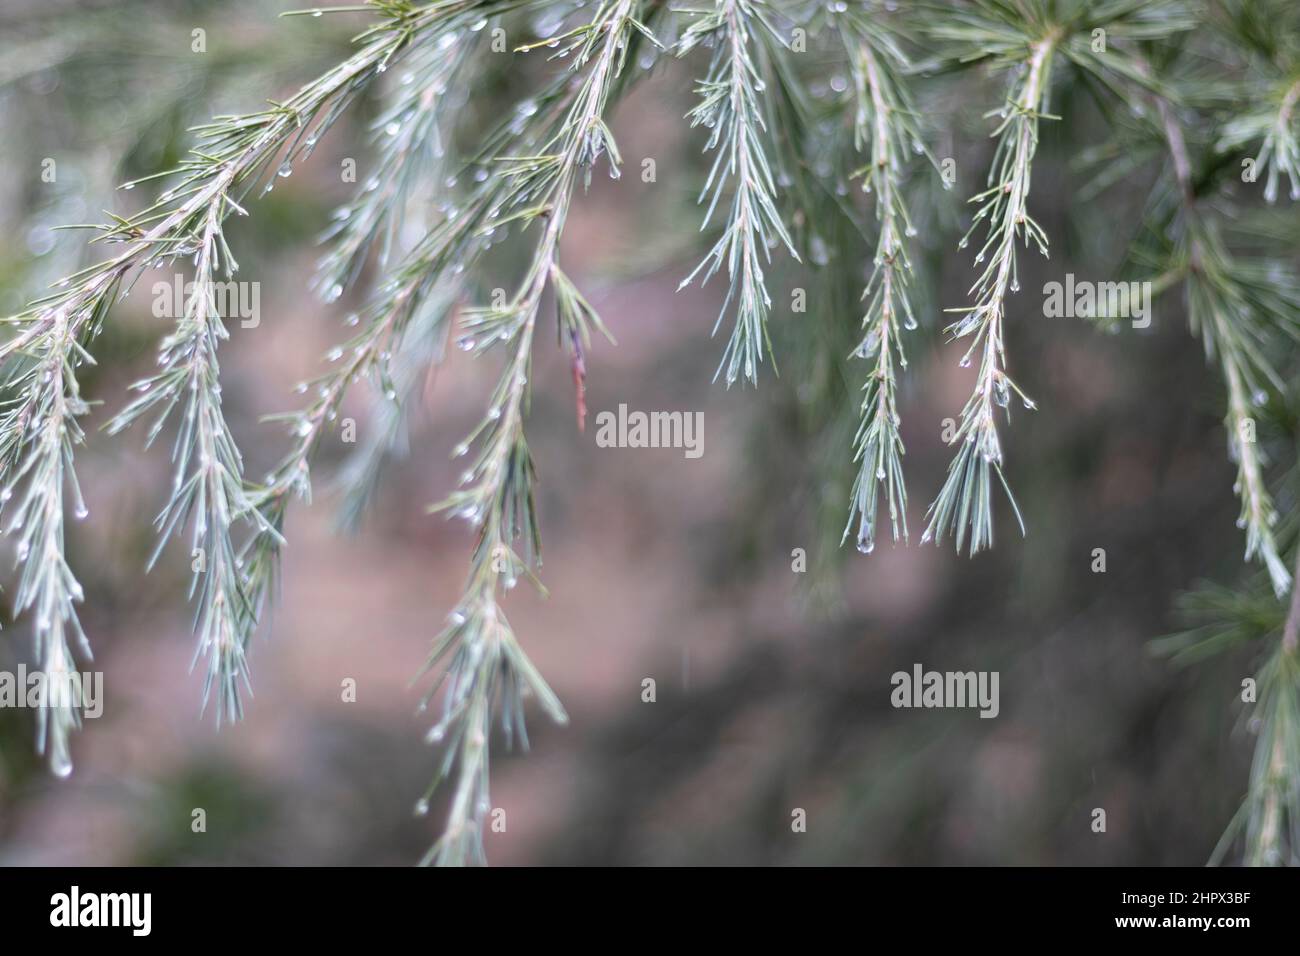 Deodar tree branch with raindrops with blur background Stock Photo